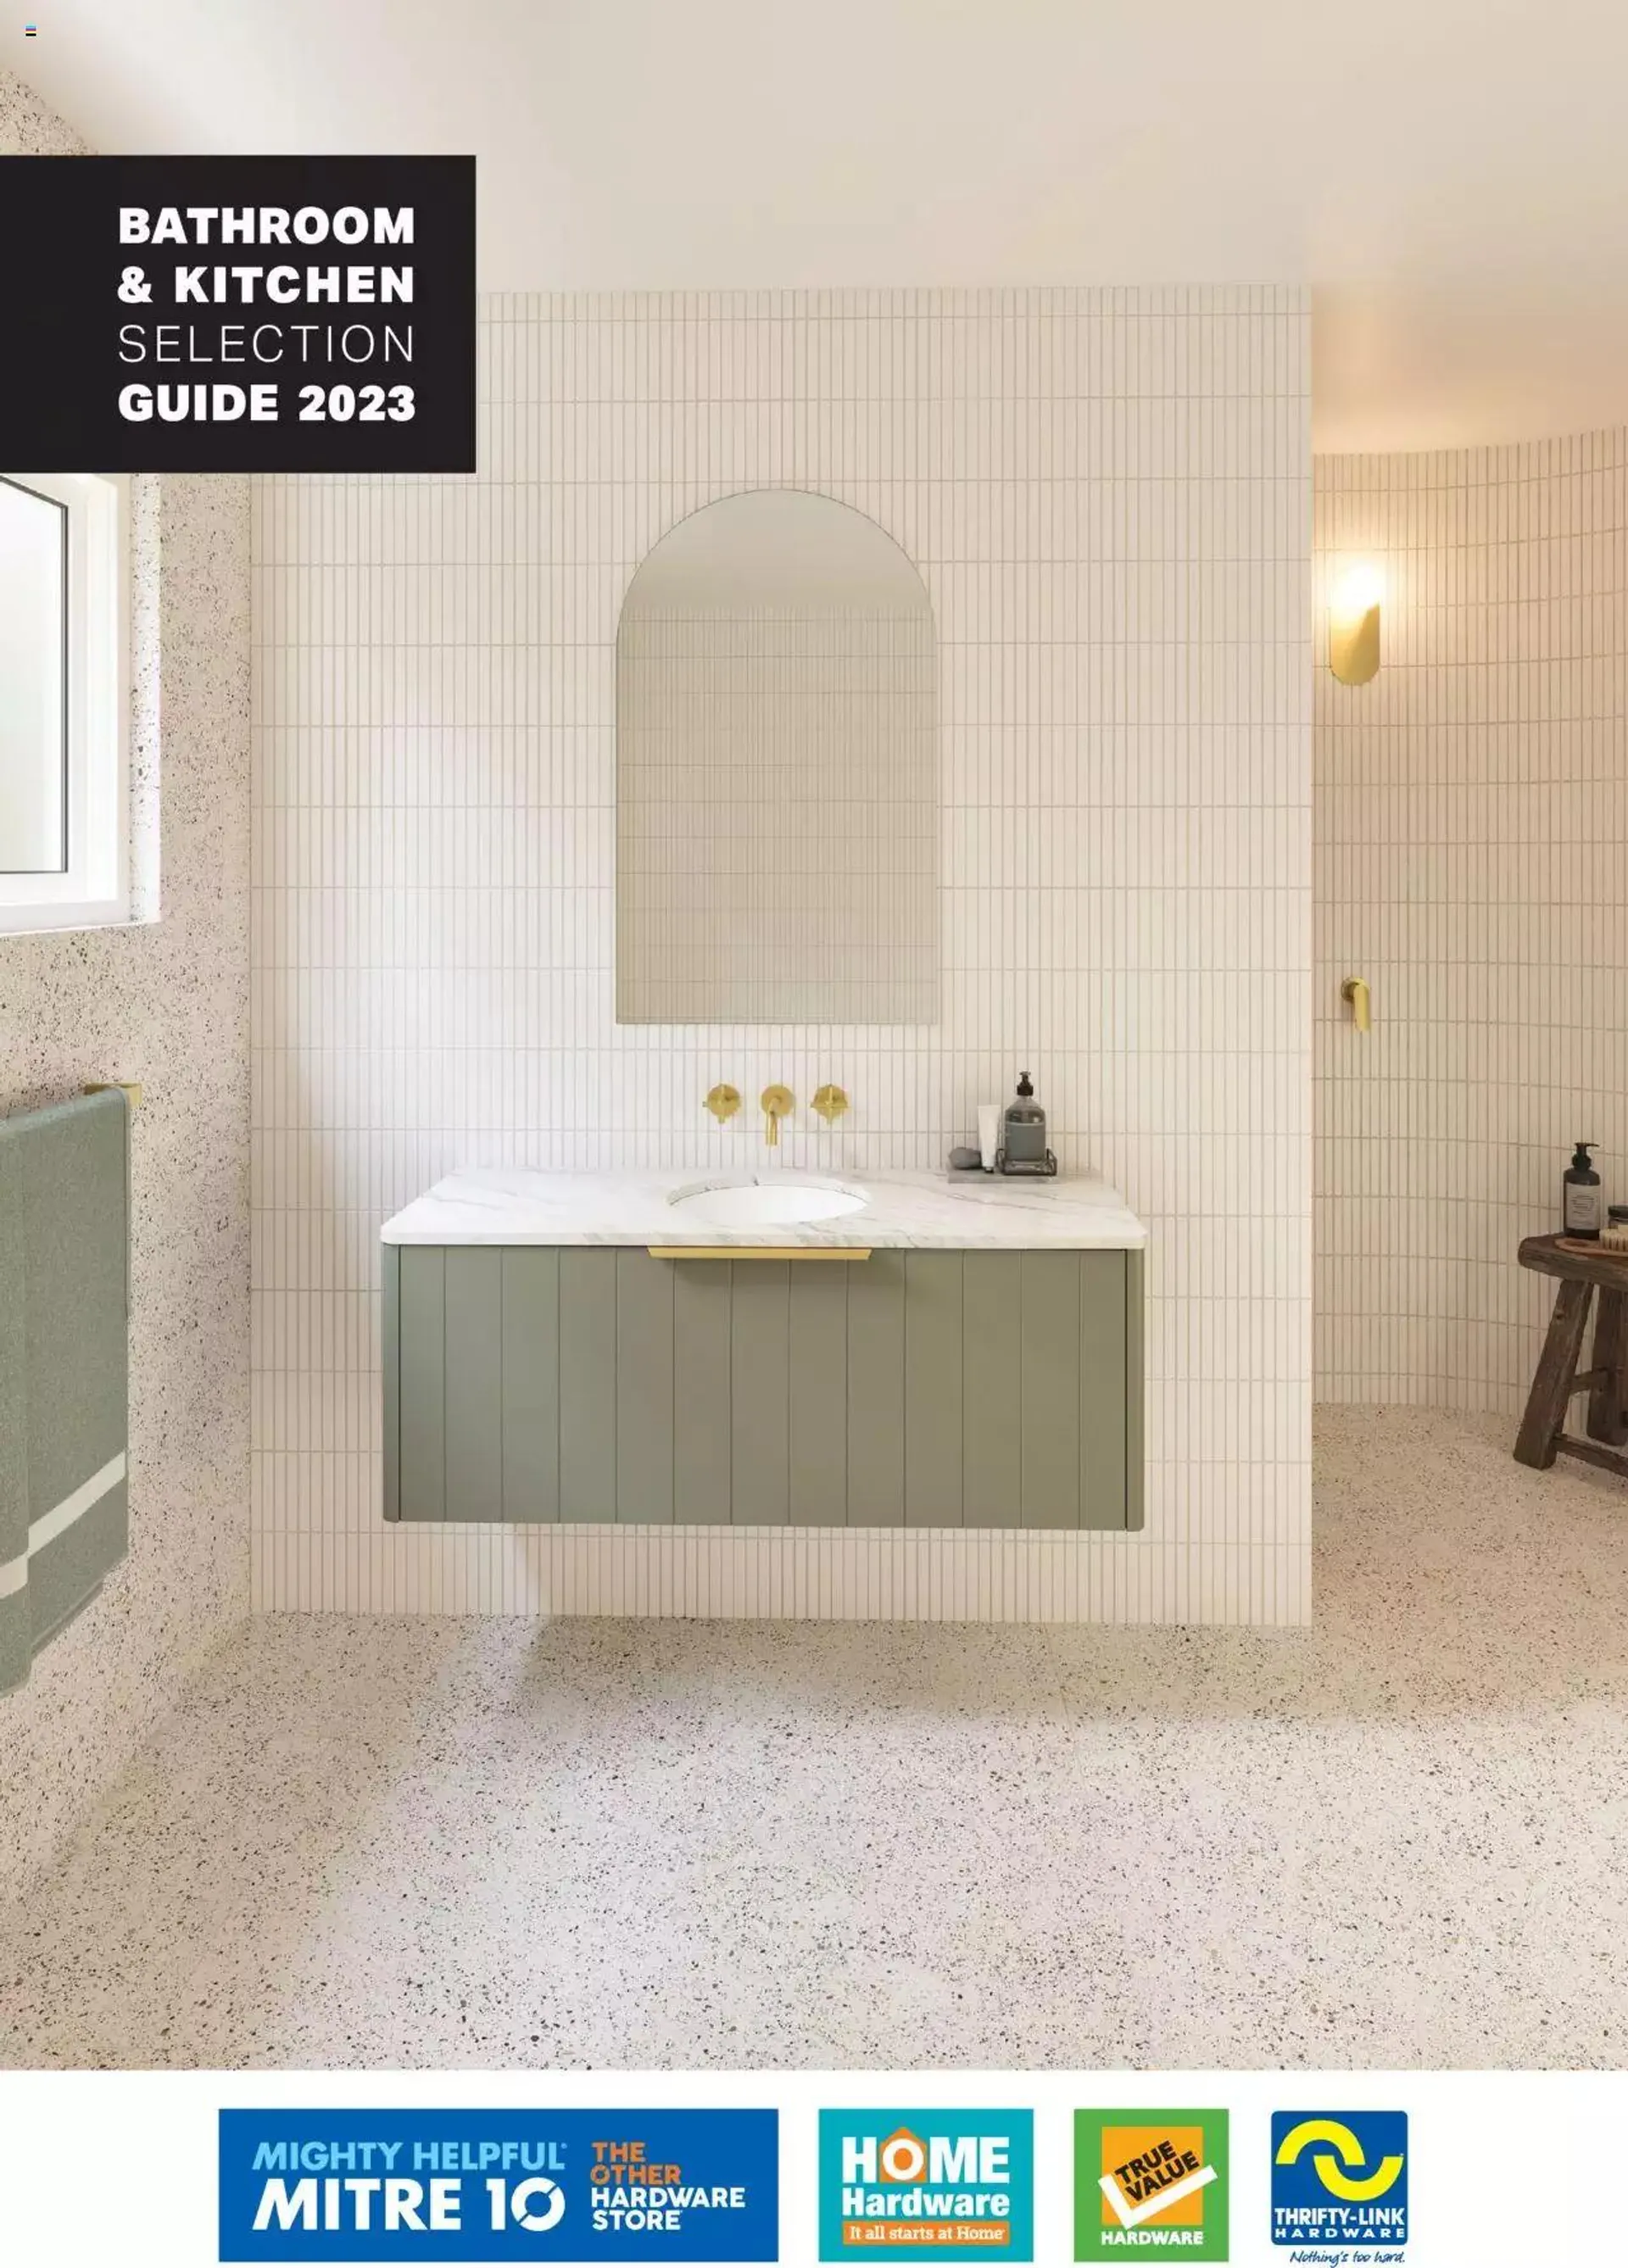 Mitre 10 Bathroom & Kitchen Selection Guide 2023 - 0